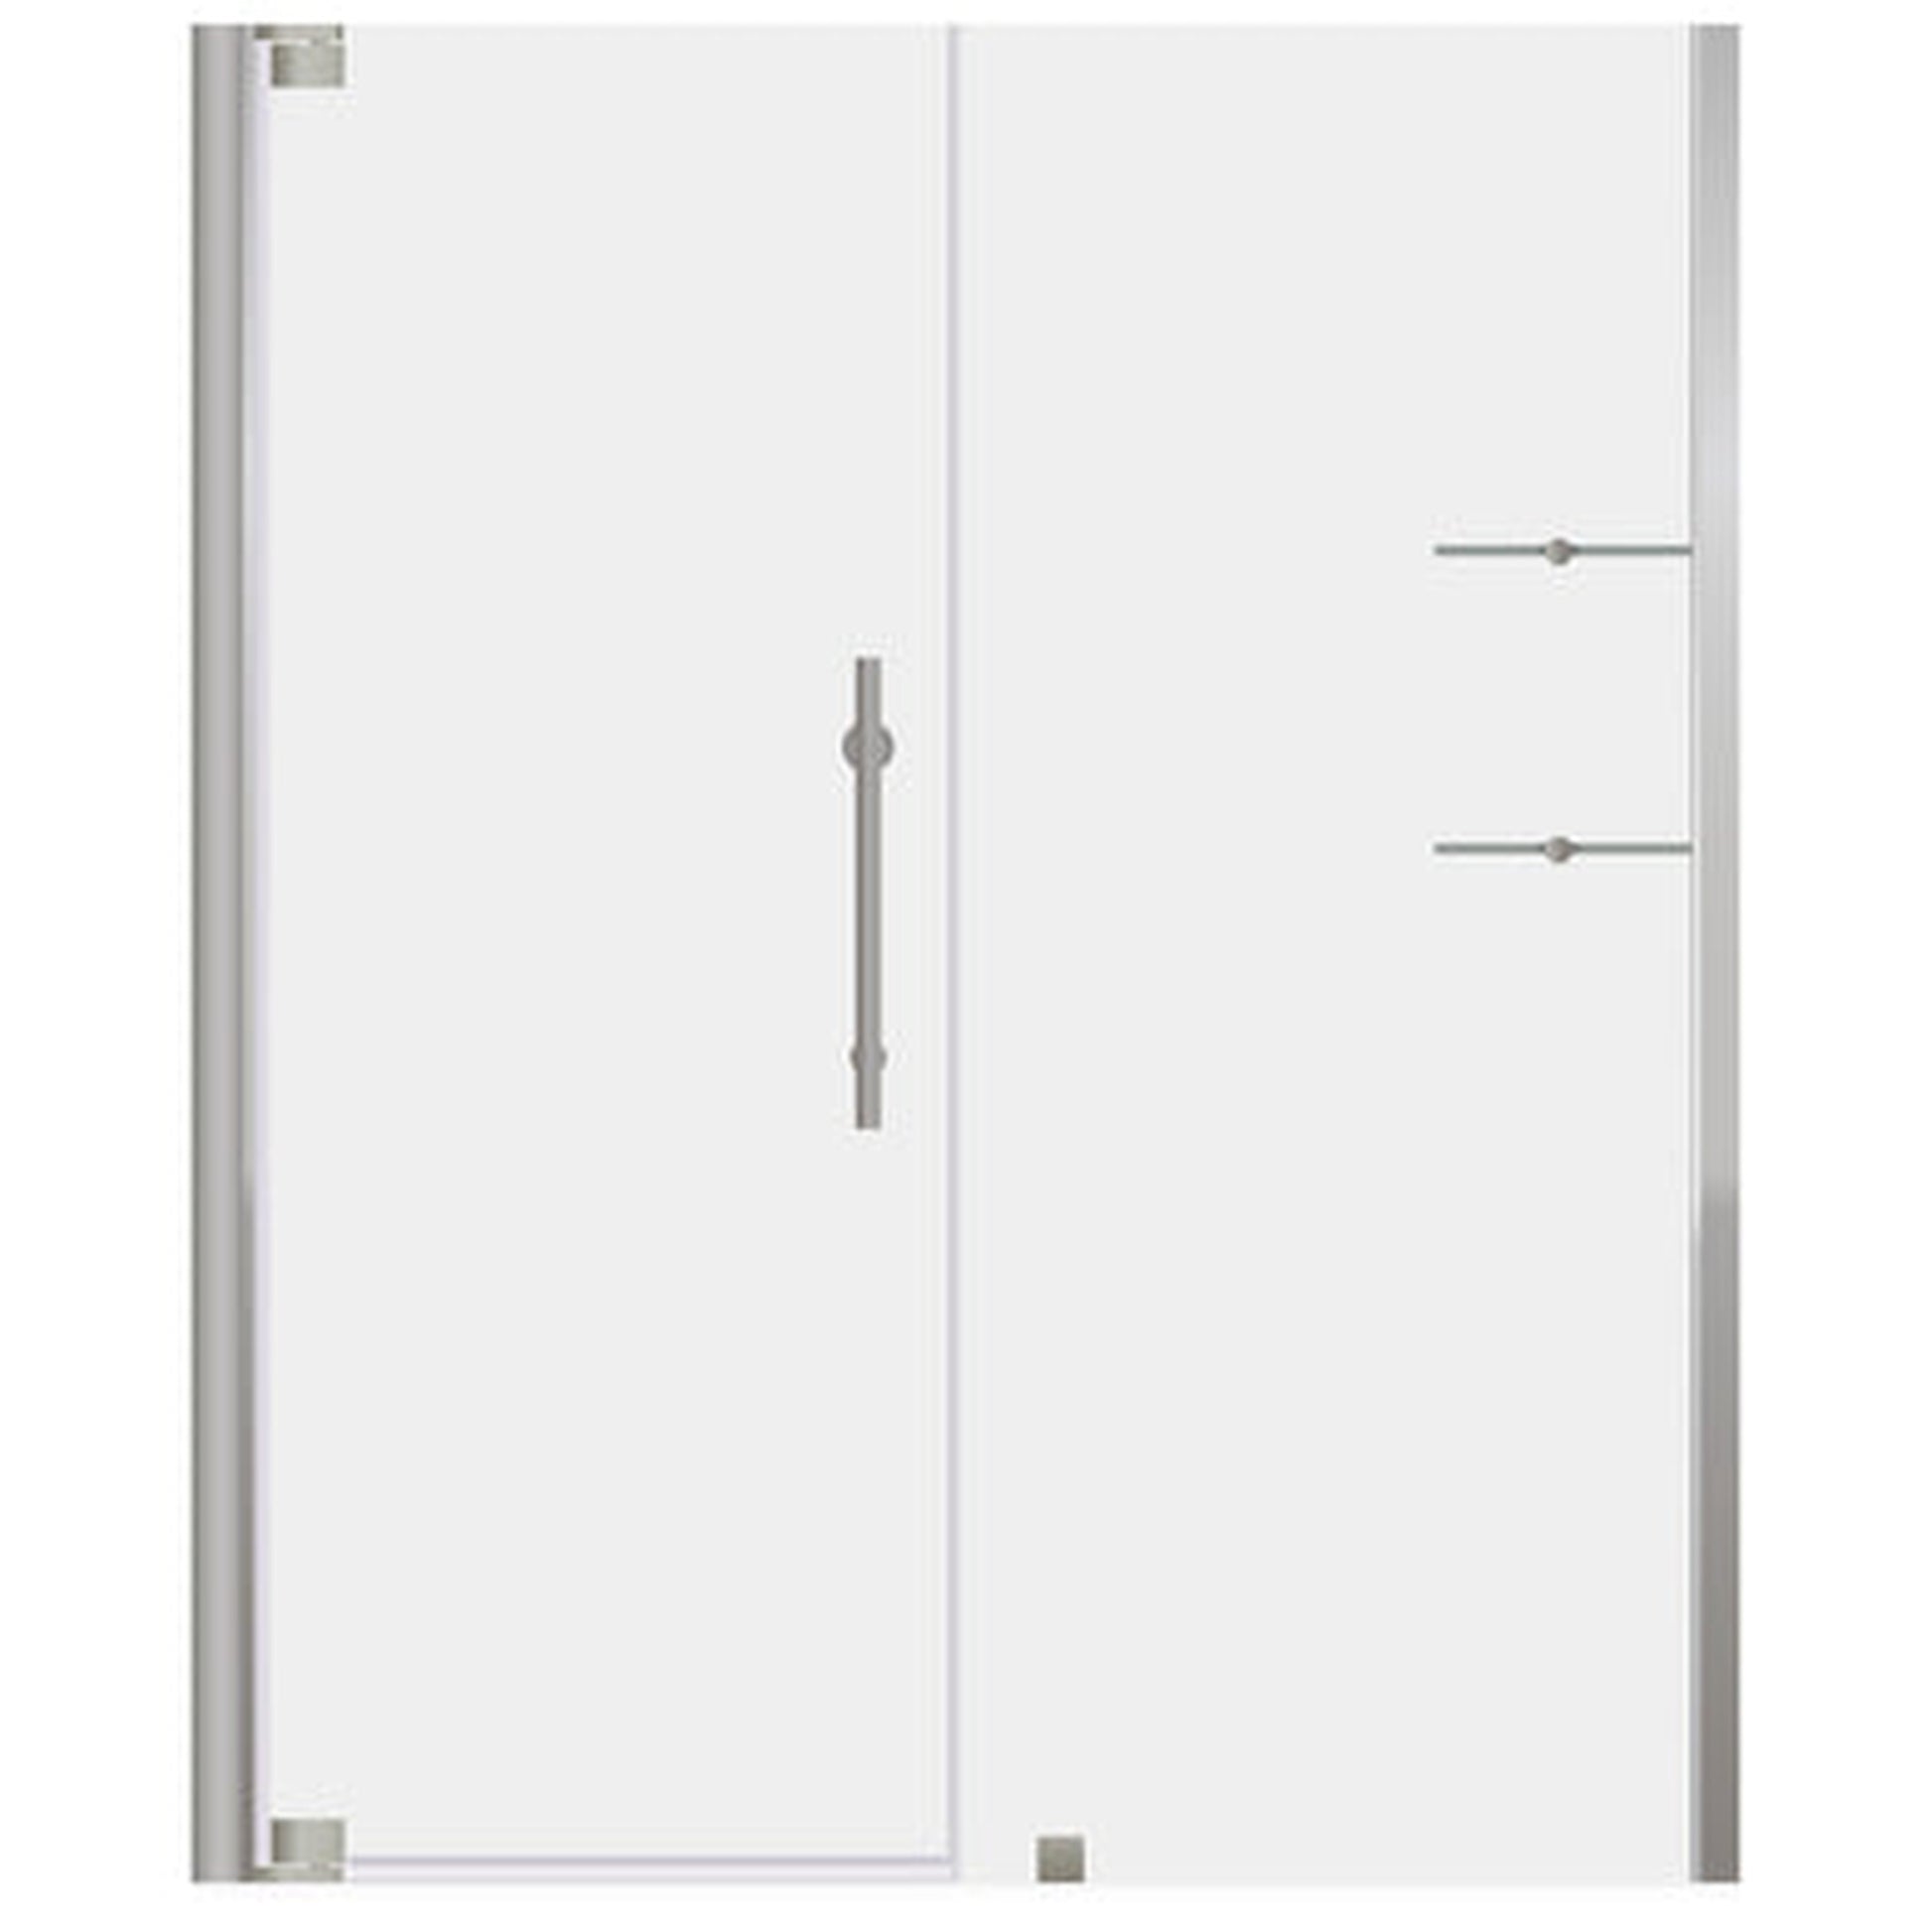 LessCare Ultra-G 63-65" x 72" Brushed Nickel Swing-Out Shower Door with 30" Side Panel